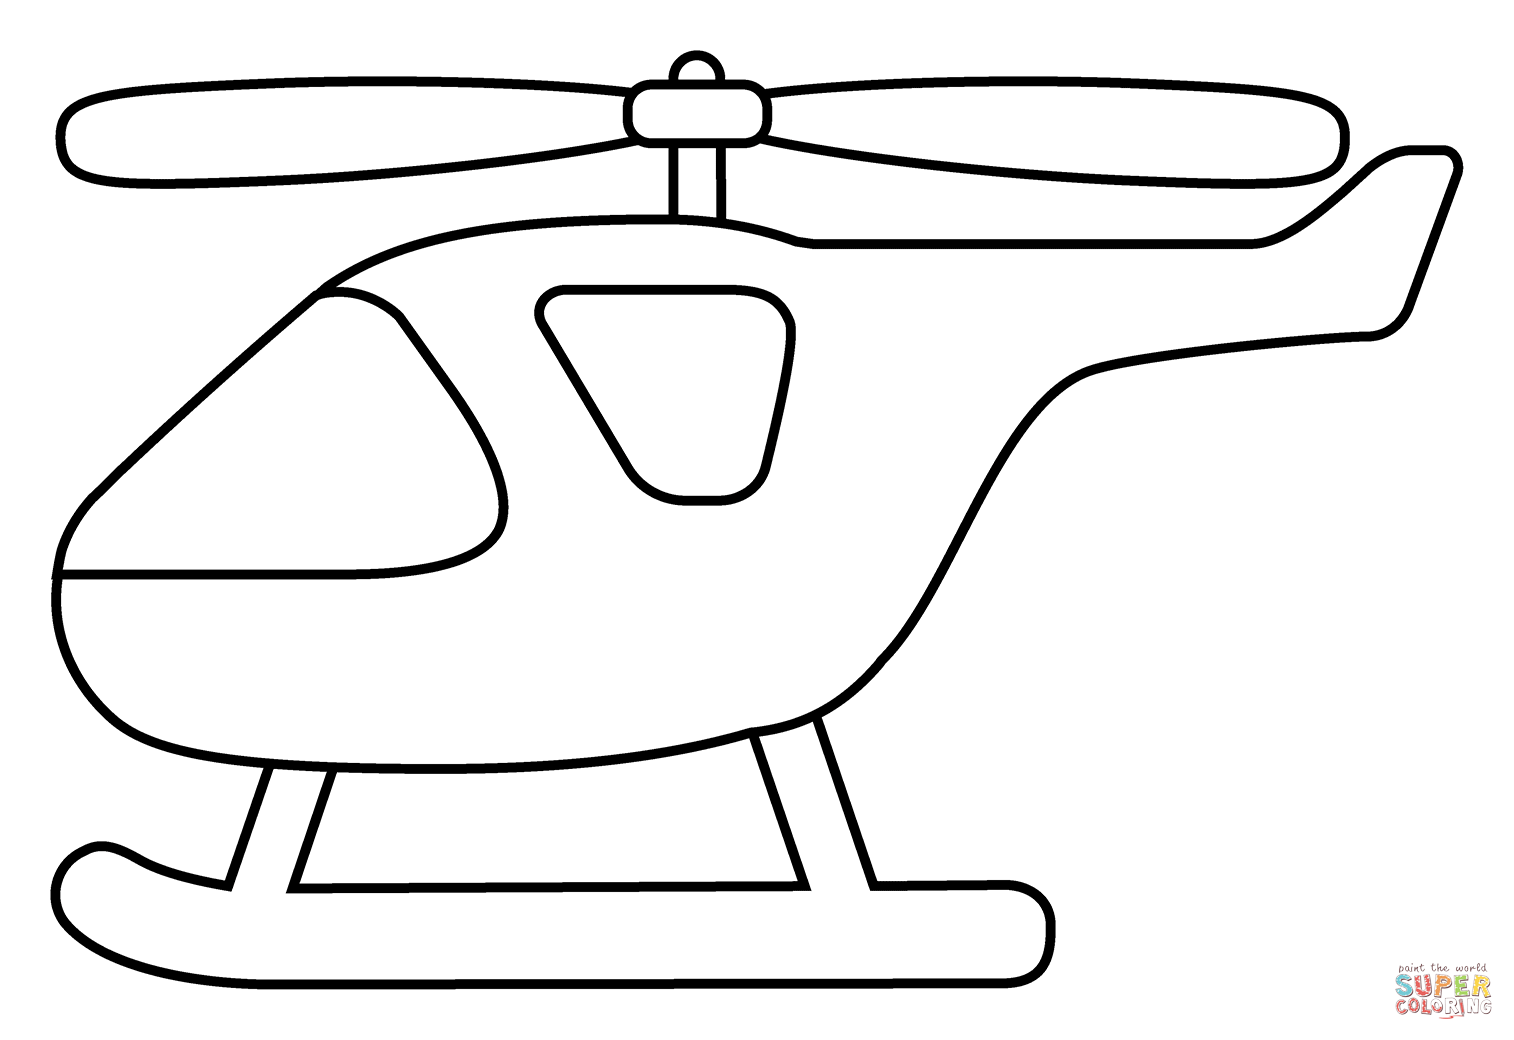 Helicopter emoji coloring page free printable coloring pages